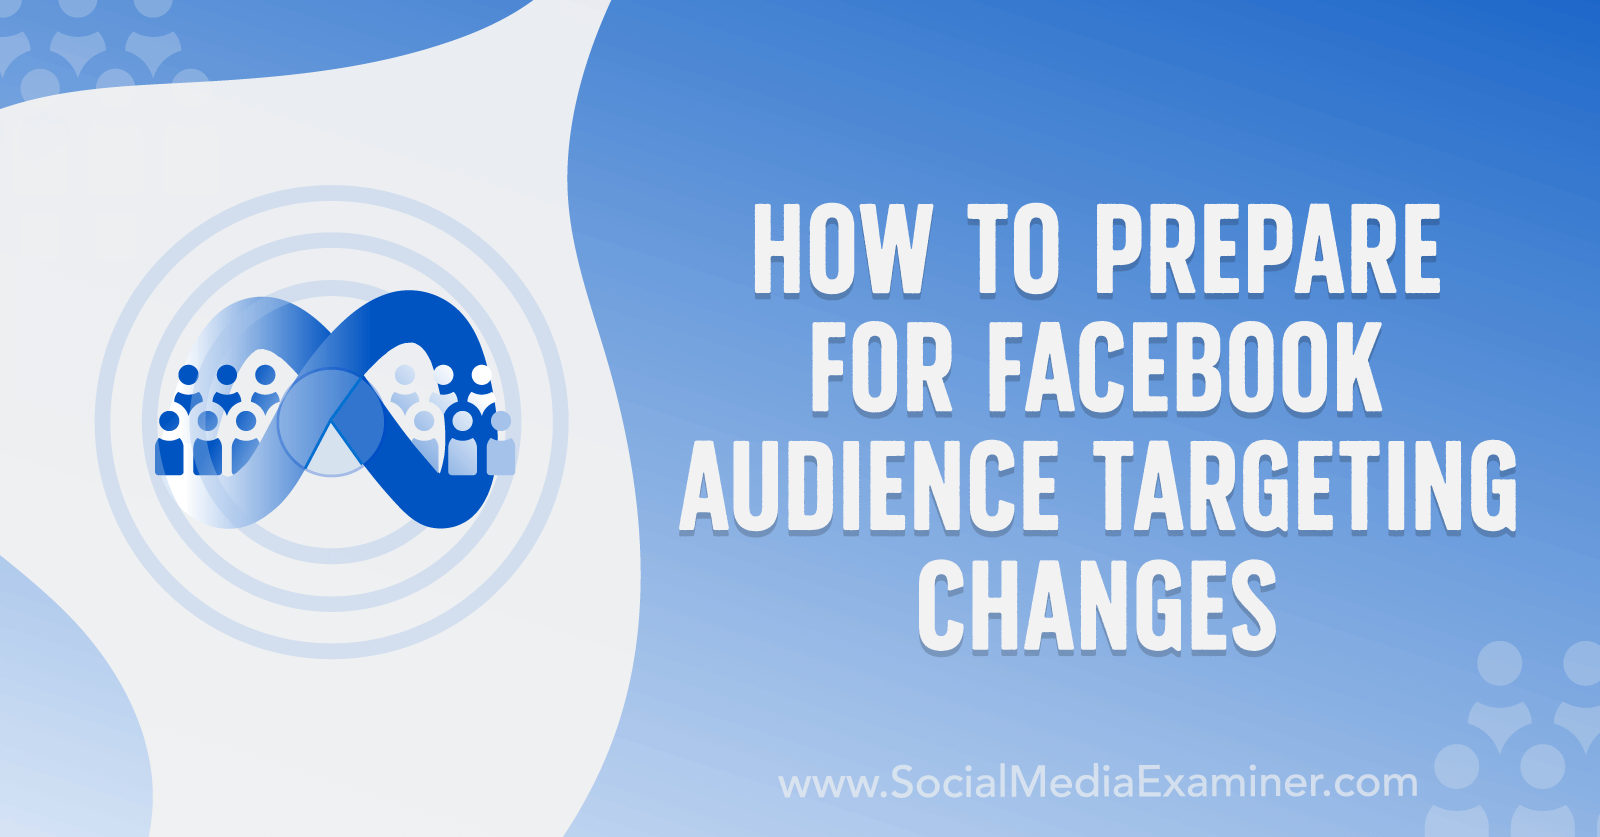 How to Prepare for Facebook Audience Targeting Changes by Anna Sonnenberg on Social Media Examiner.